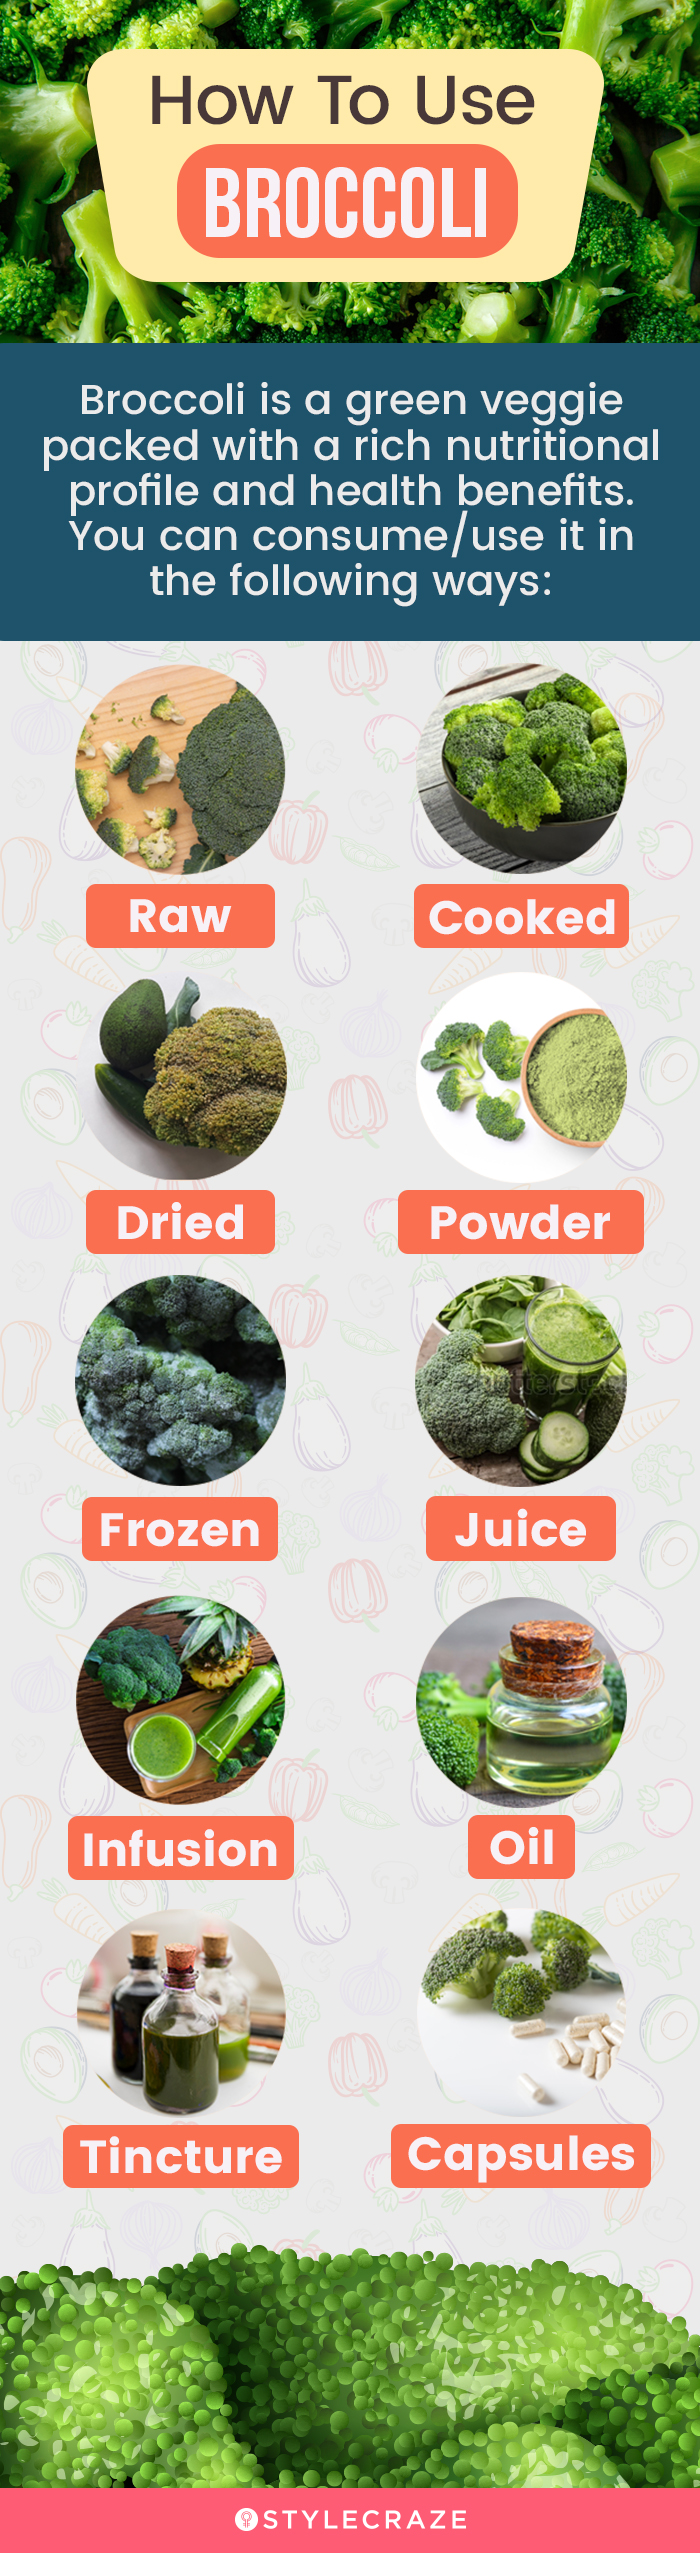 how to use broccoli [infographic]